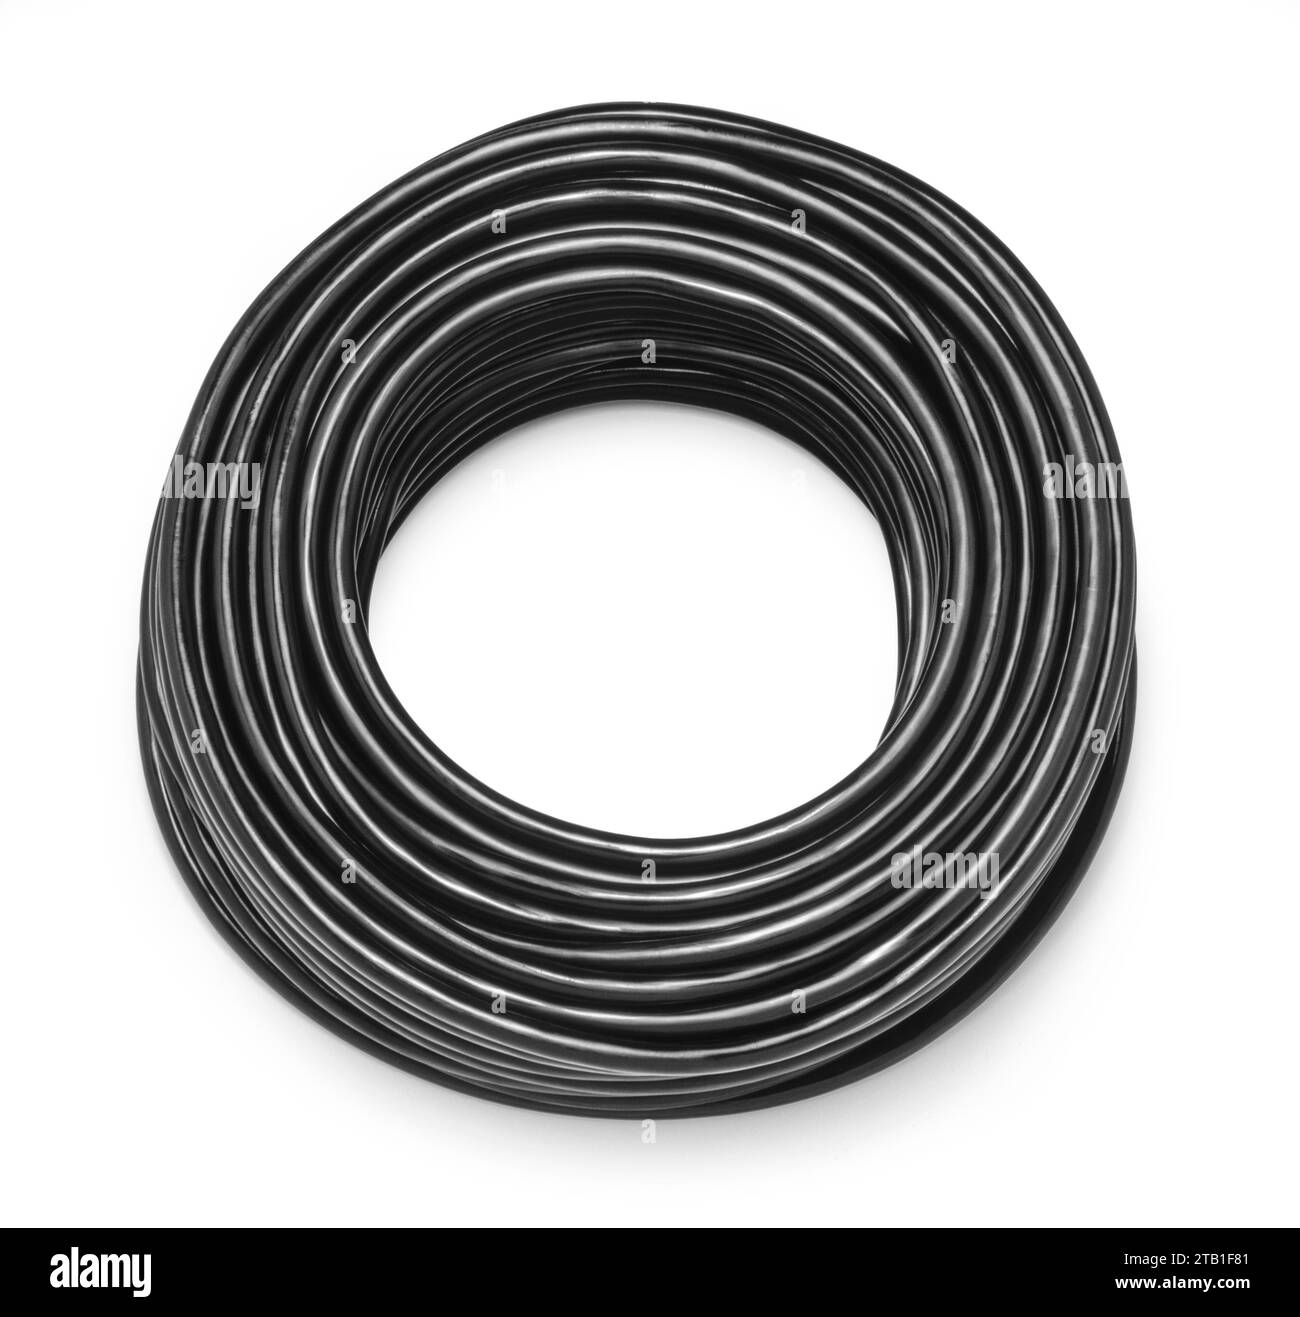 Hose roll Black and White Stock Photos & Images - Alamy